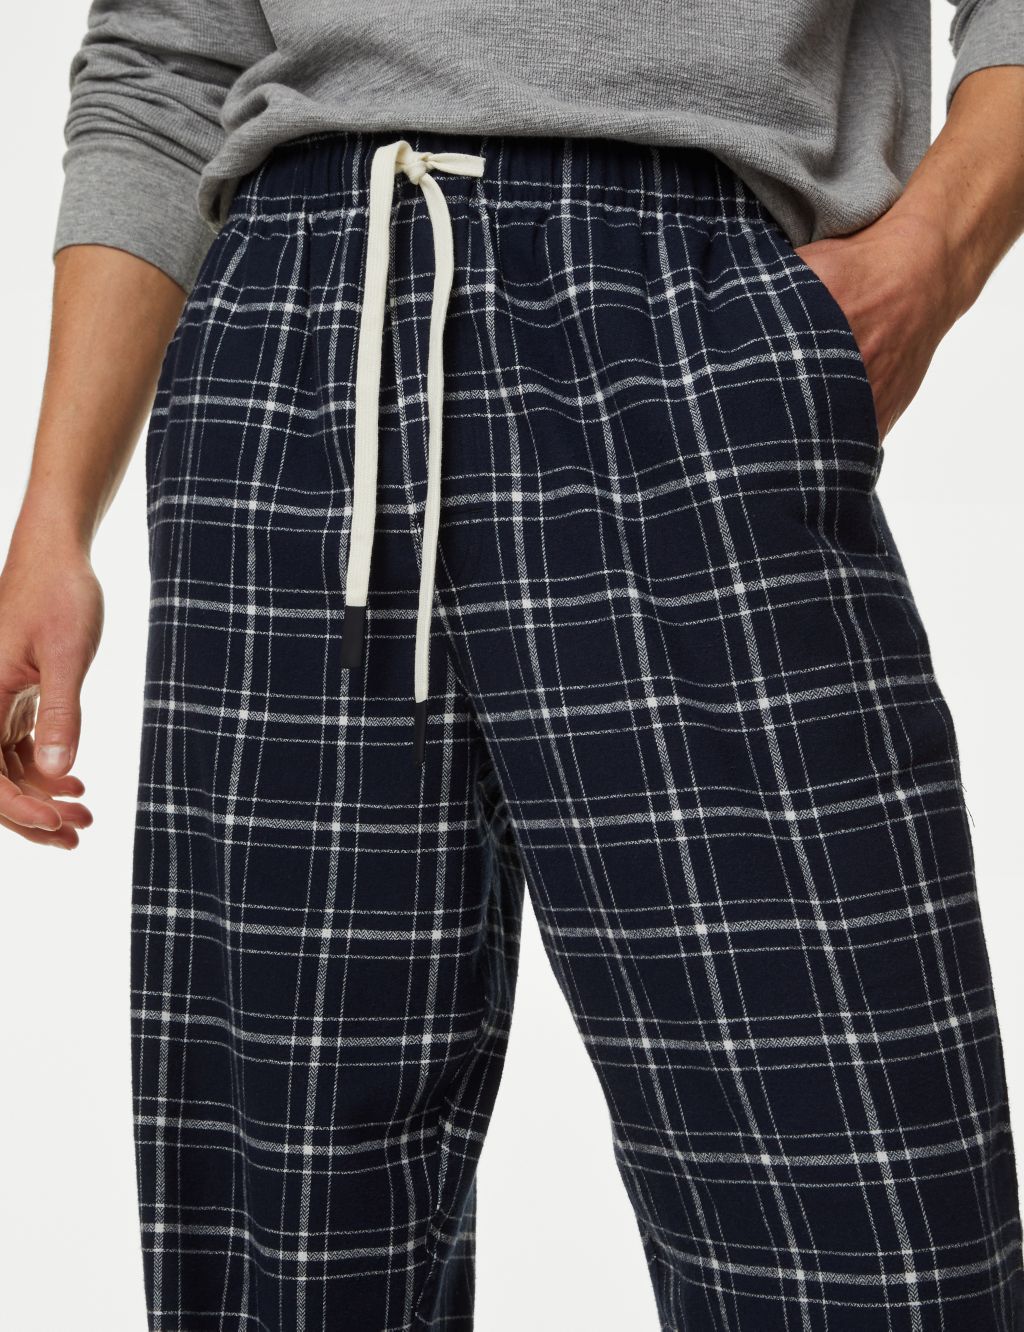 Brushed Cotton Checked Loungewear Bottoms image 4